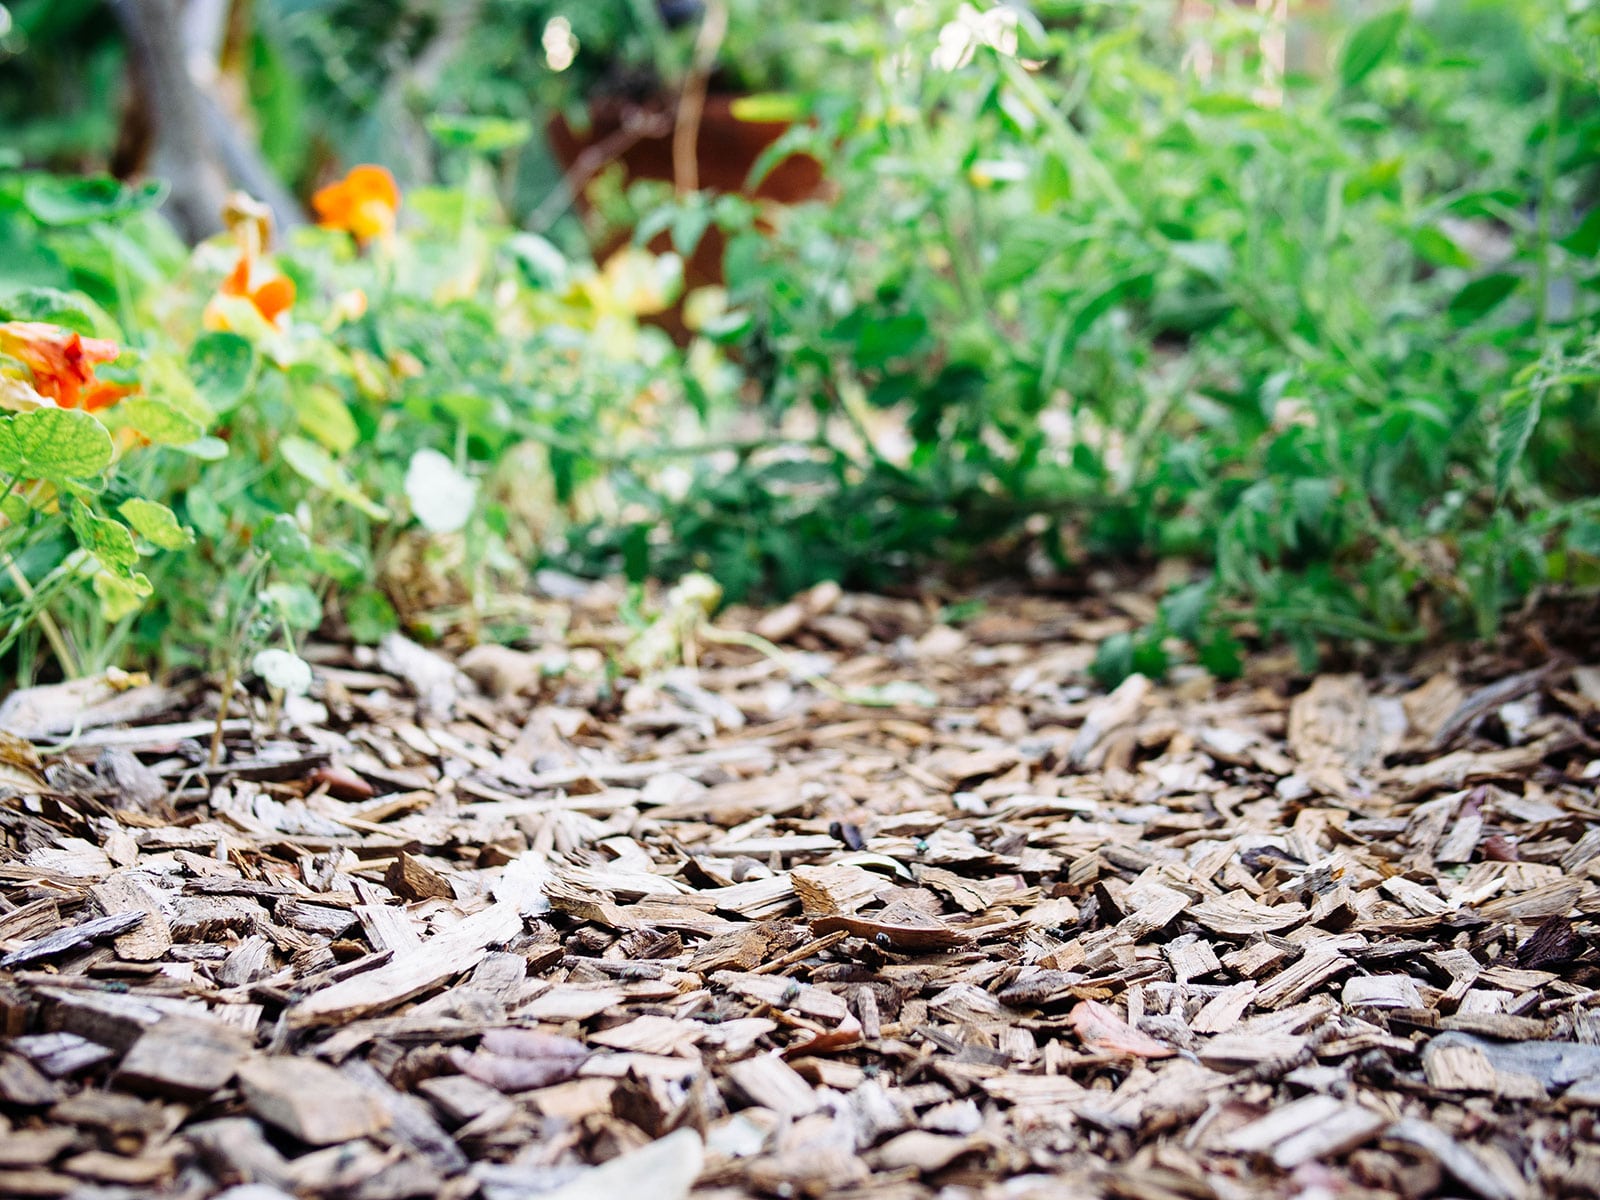 Close-up of chipped wood mulch in a garden